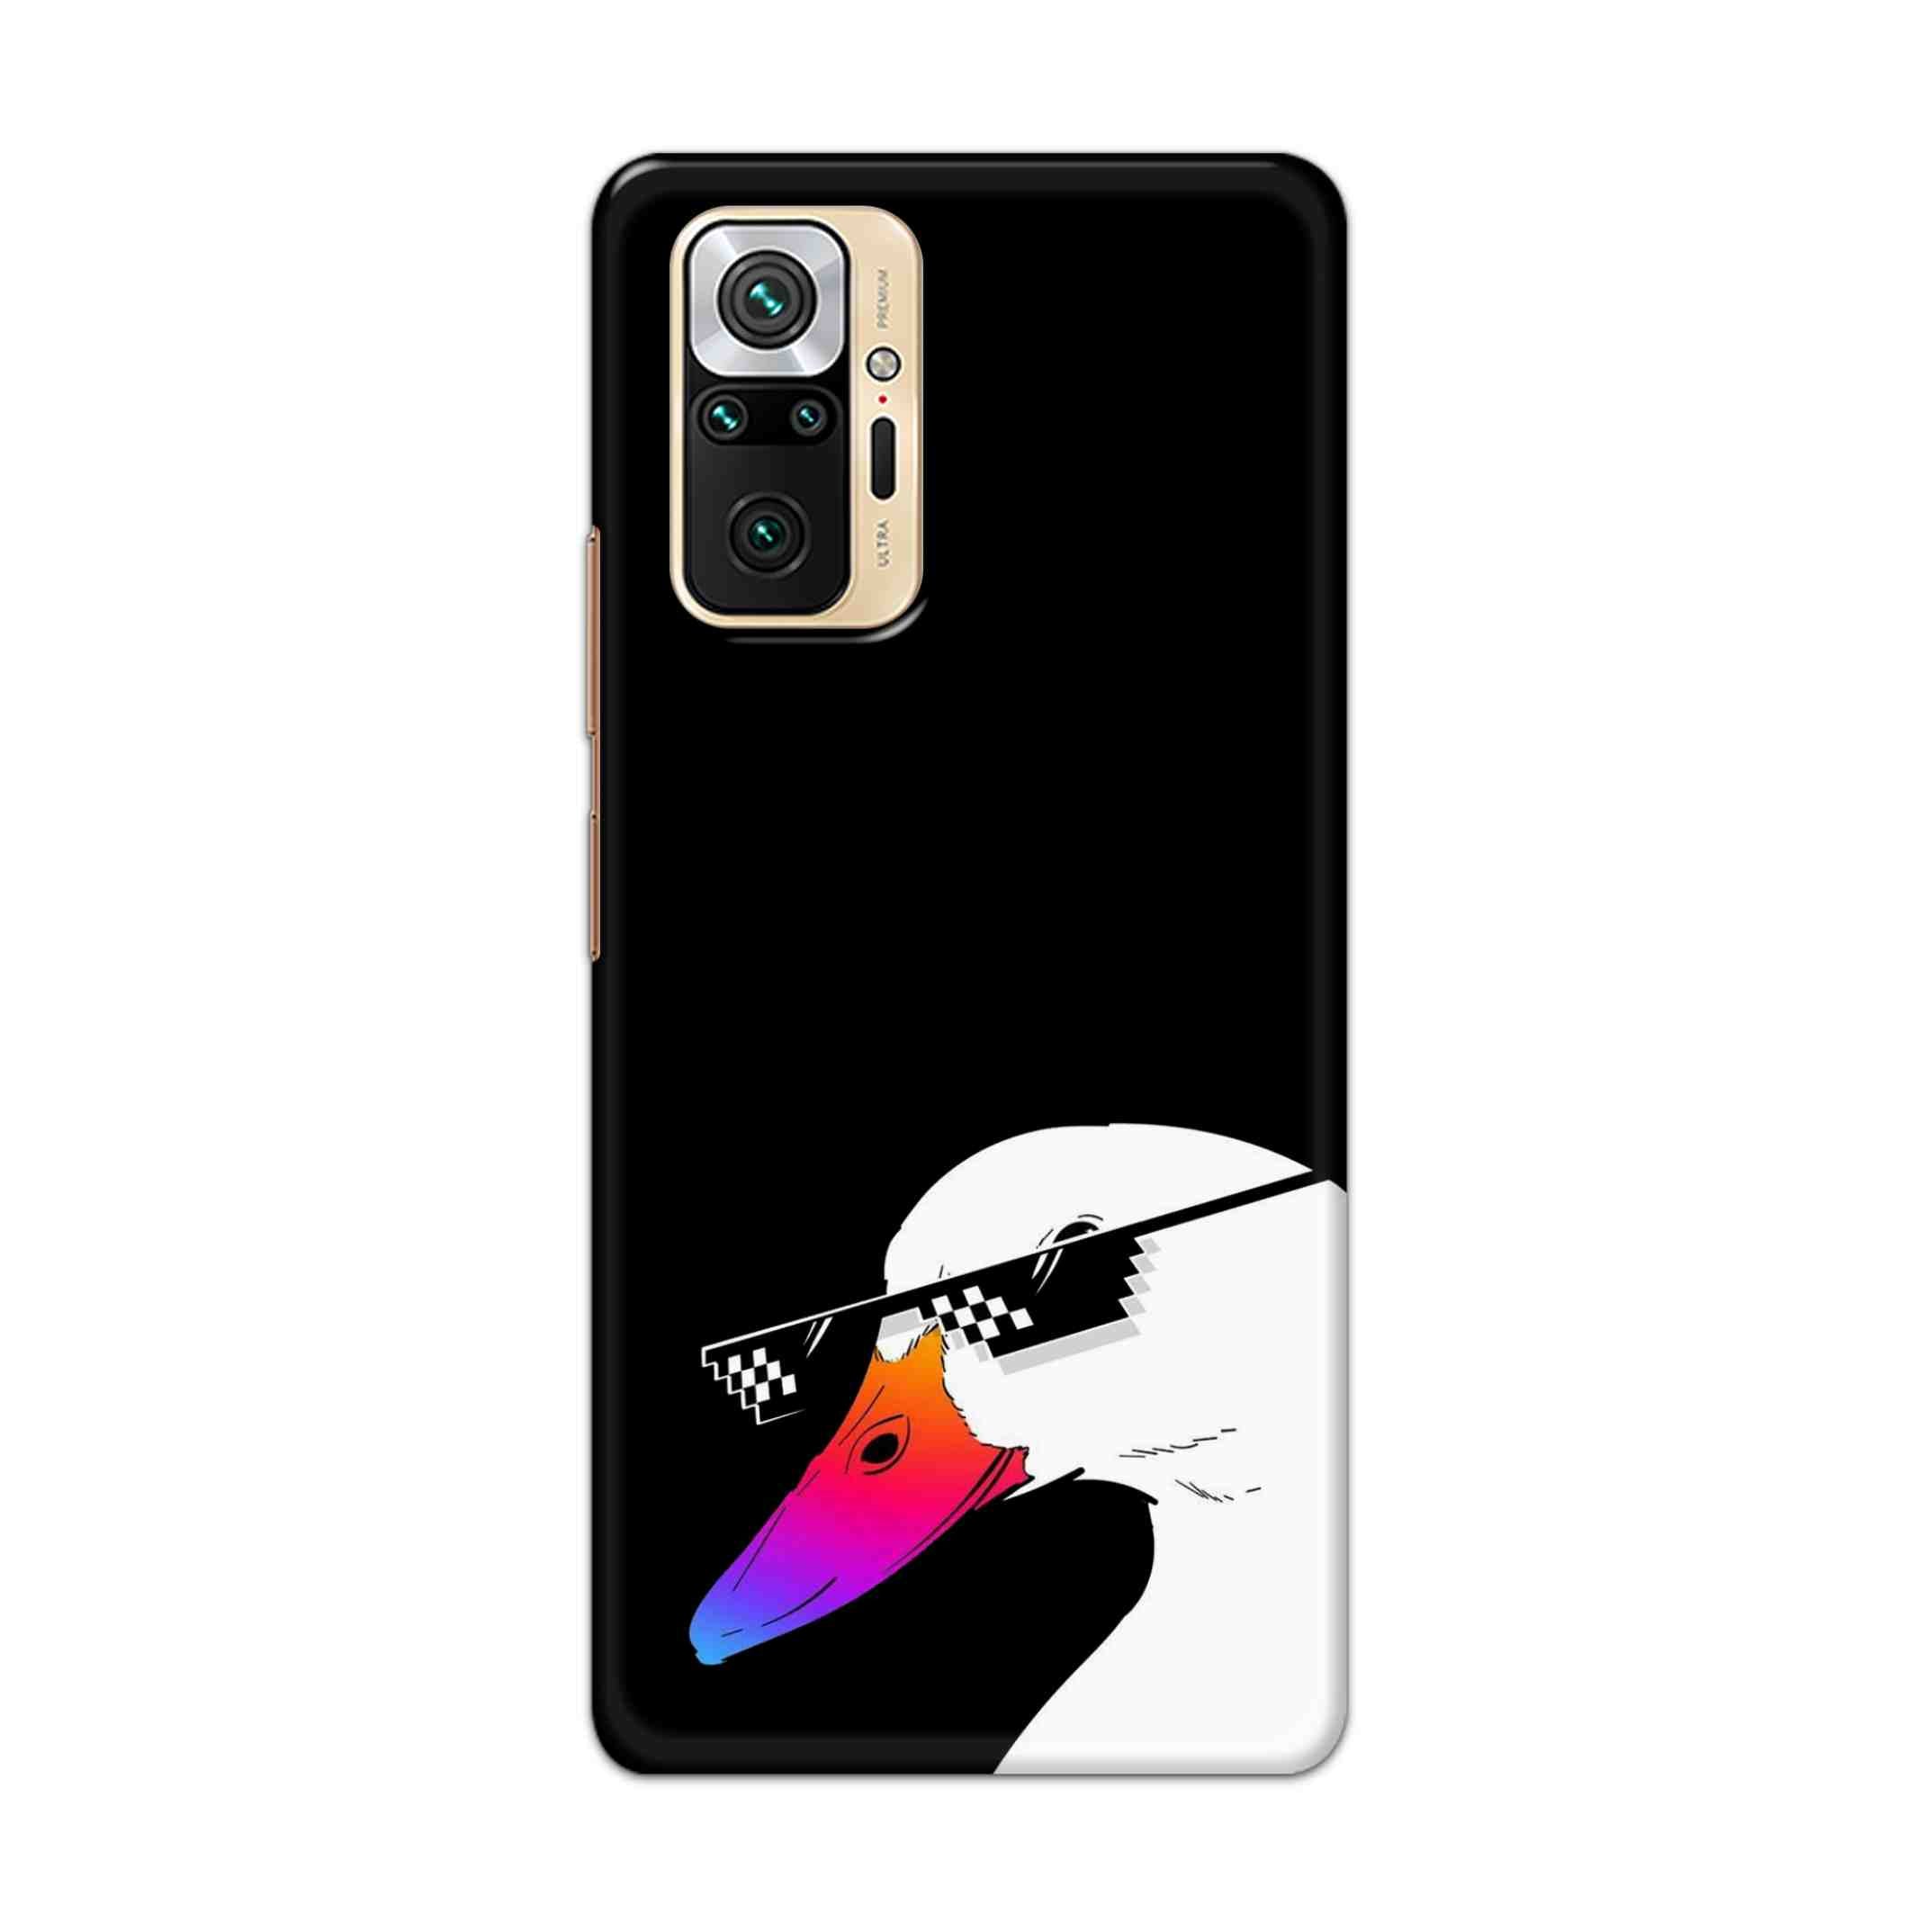 Buy Neon Duck Hard Back Mobile Phone Case Cover For Redmi Note 10 Pro Online